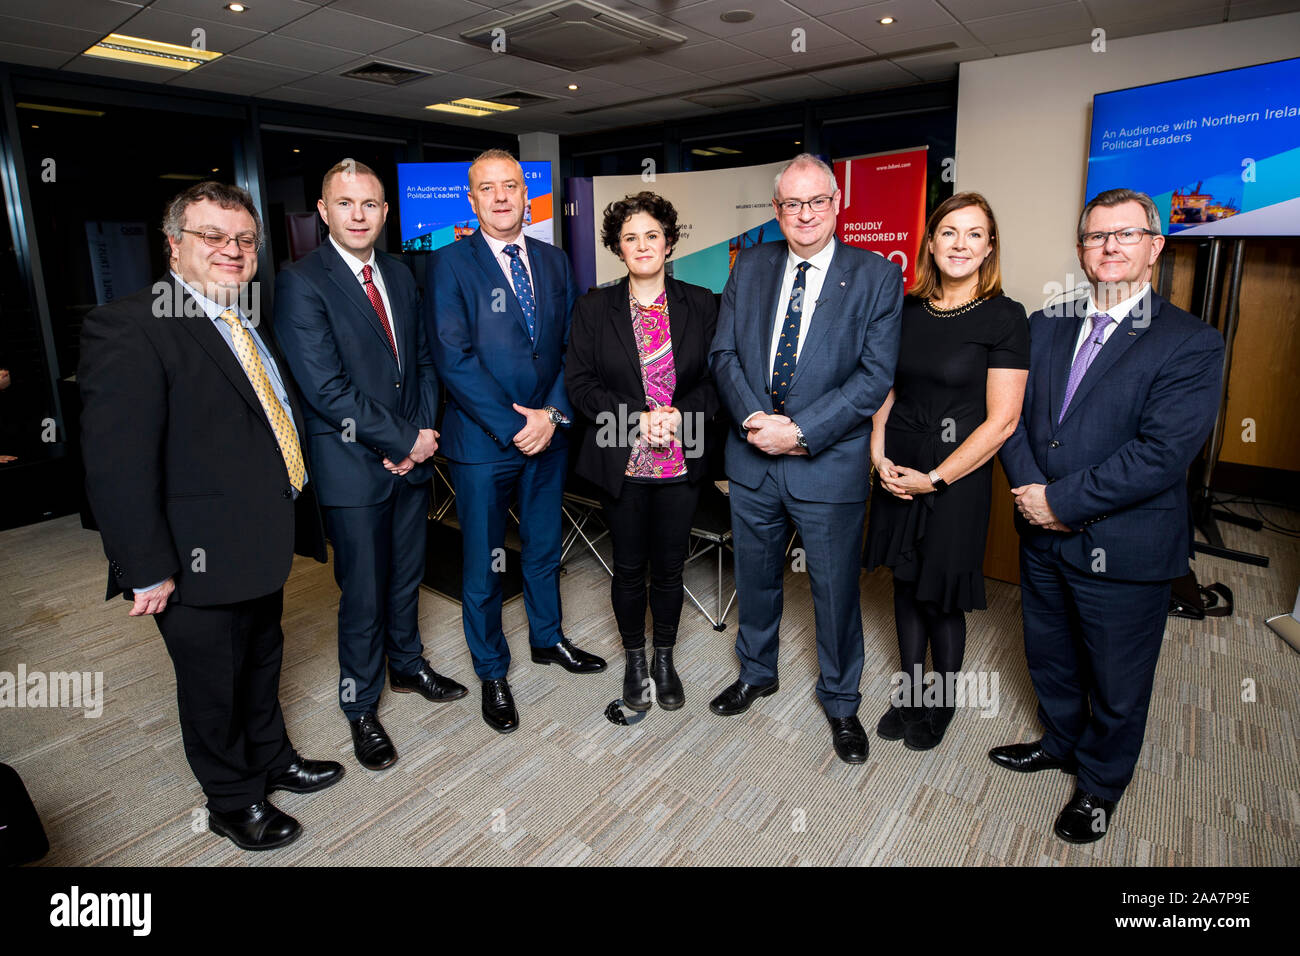 (left to right) Dr Stephen Farry, Chris Hazzard, Trevor Lockhart CBI NI chair and CEO of Fane Valley, Claire Hanna, Dr Steve Aiken, Angela McGowan CBI NI director and Sir Jeffrey Donaldson during the CBI NI business election hustings at the Law Society of Northern Ireland. Stock Photo